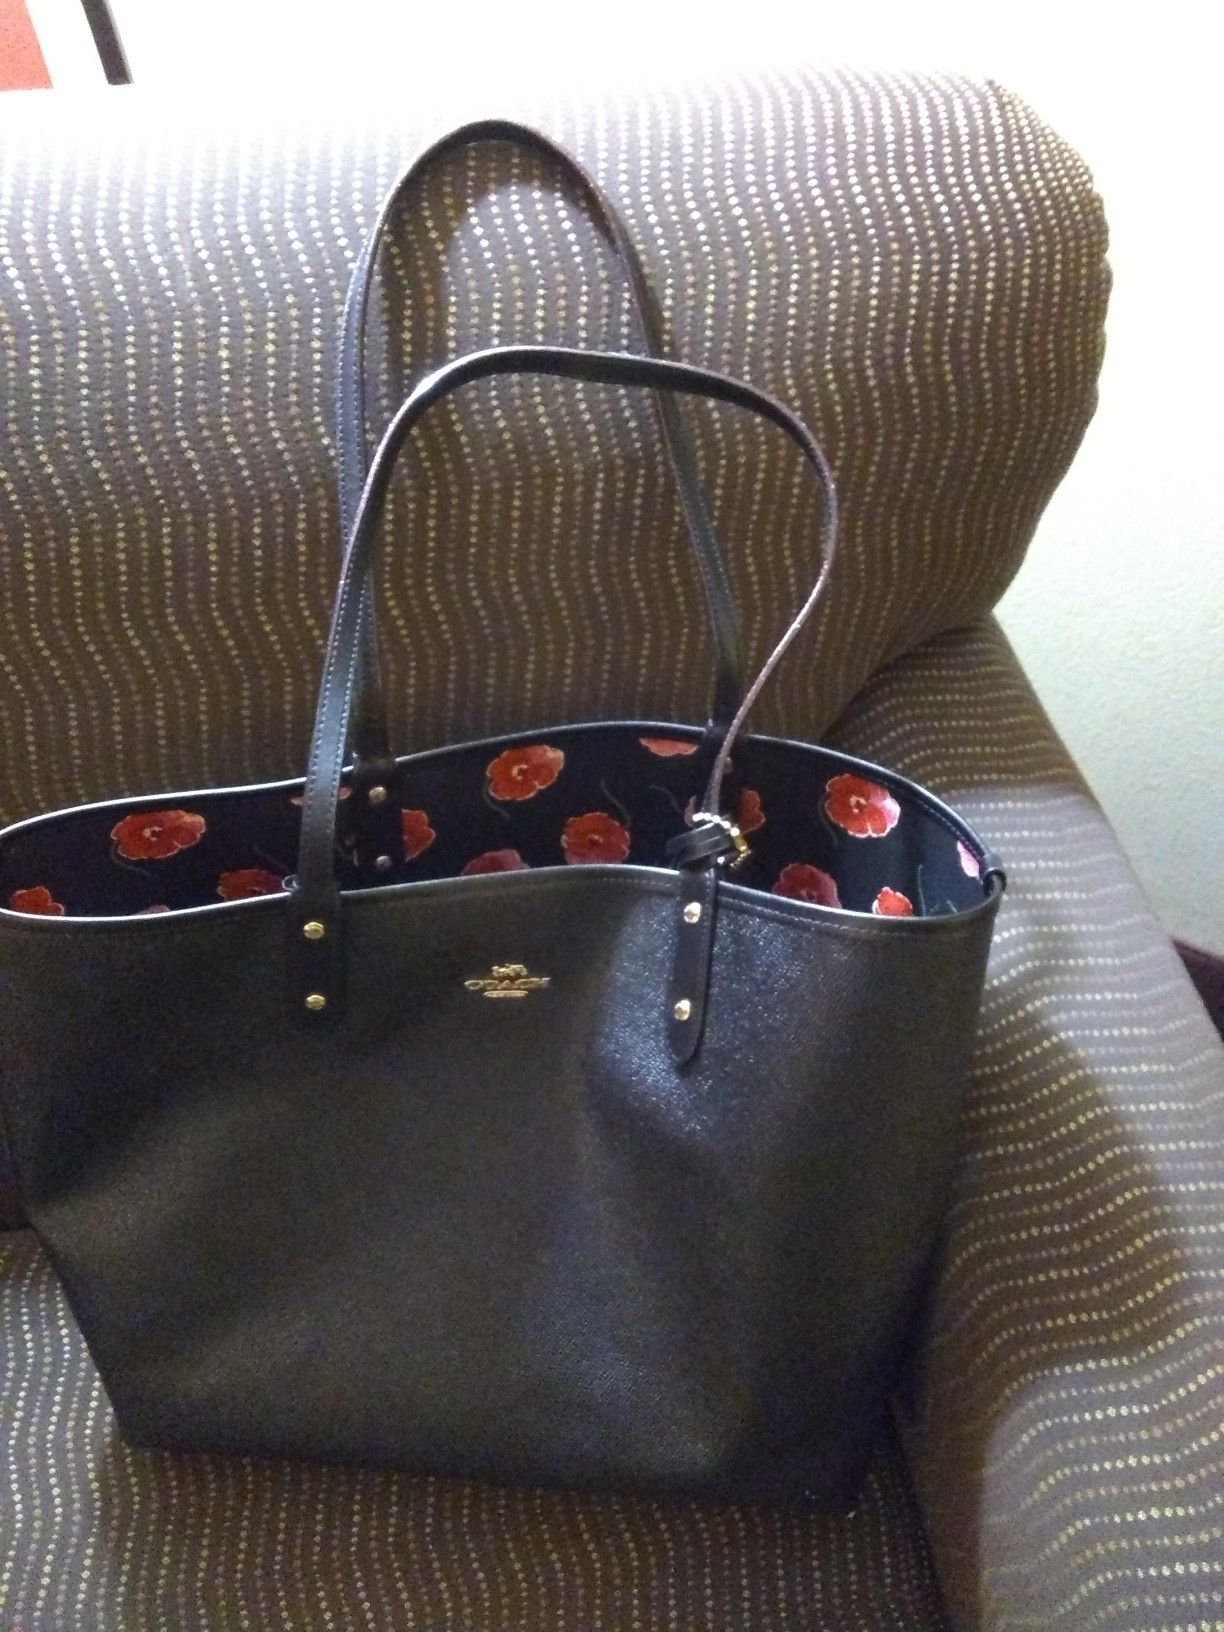 Coach large black bag and wallet